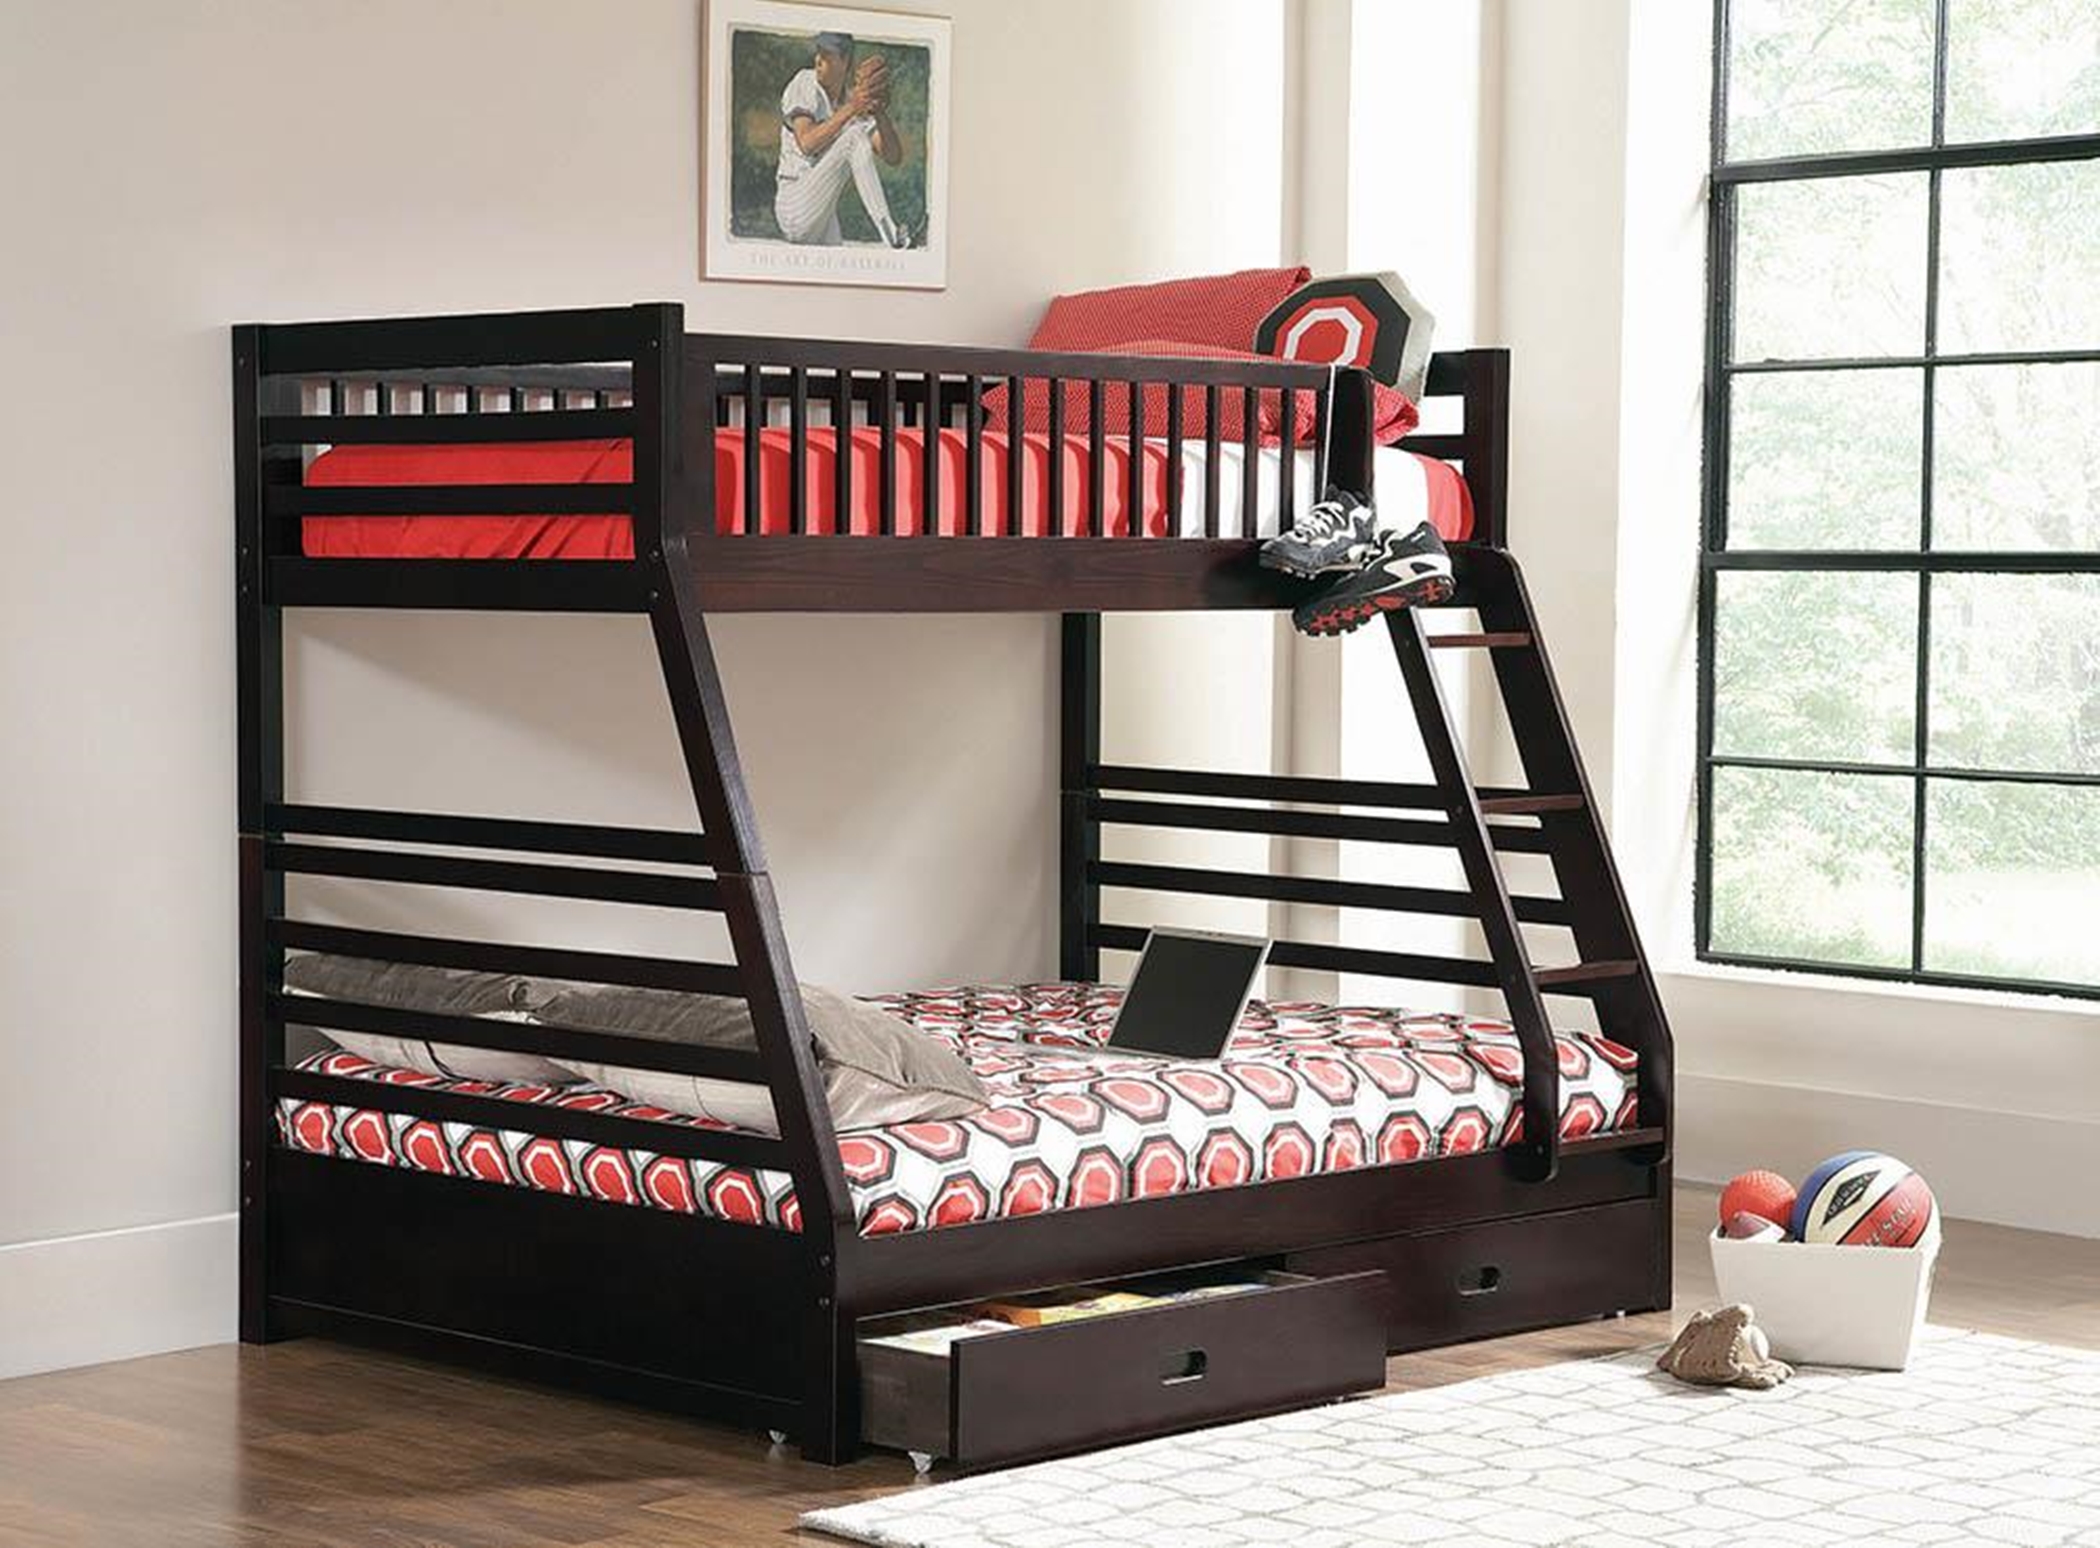 Ashton Capp. Twin-over-Full Bunk Bed - Click Image to Close